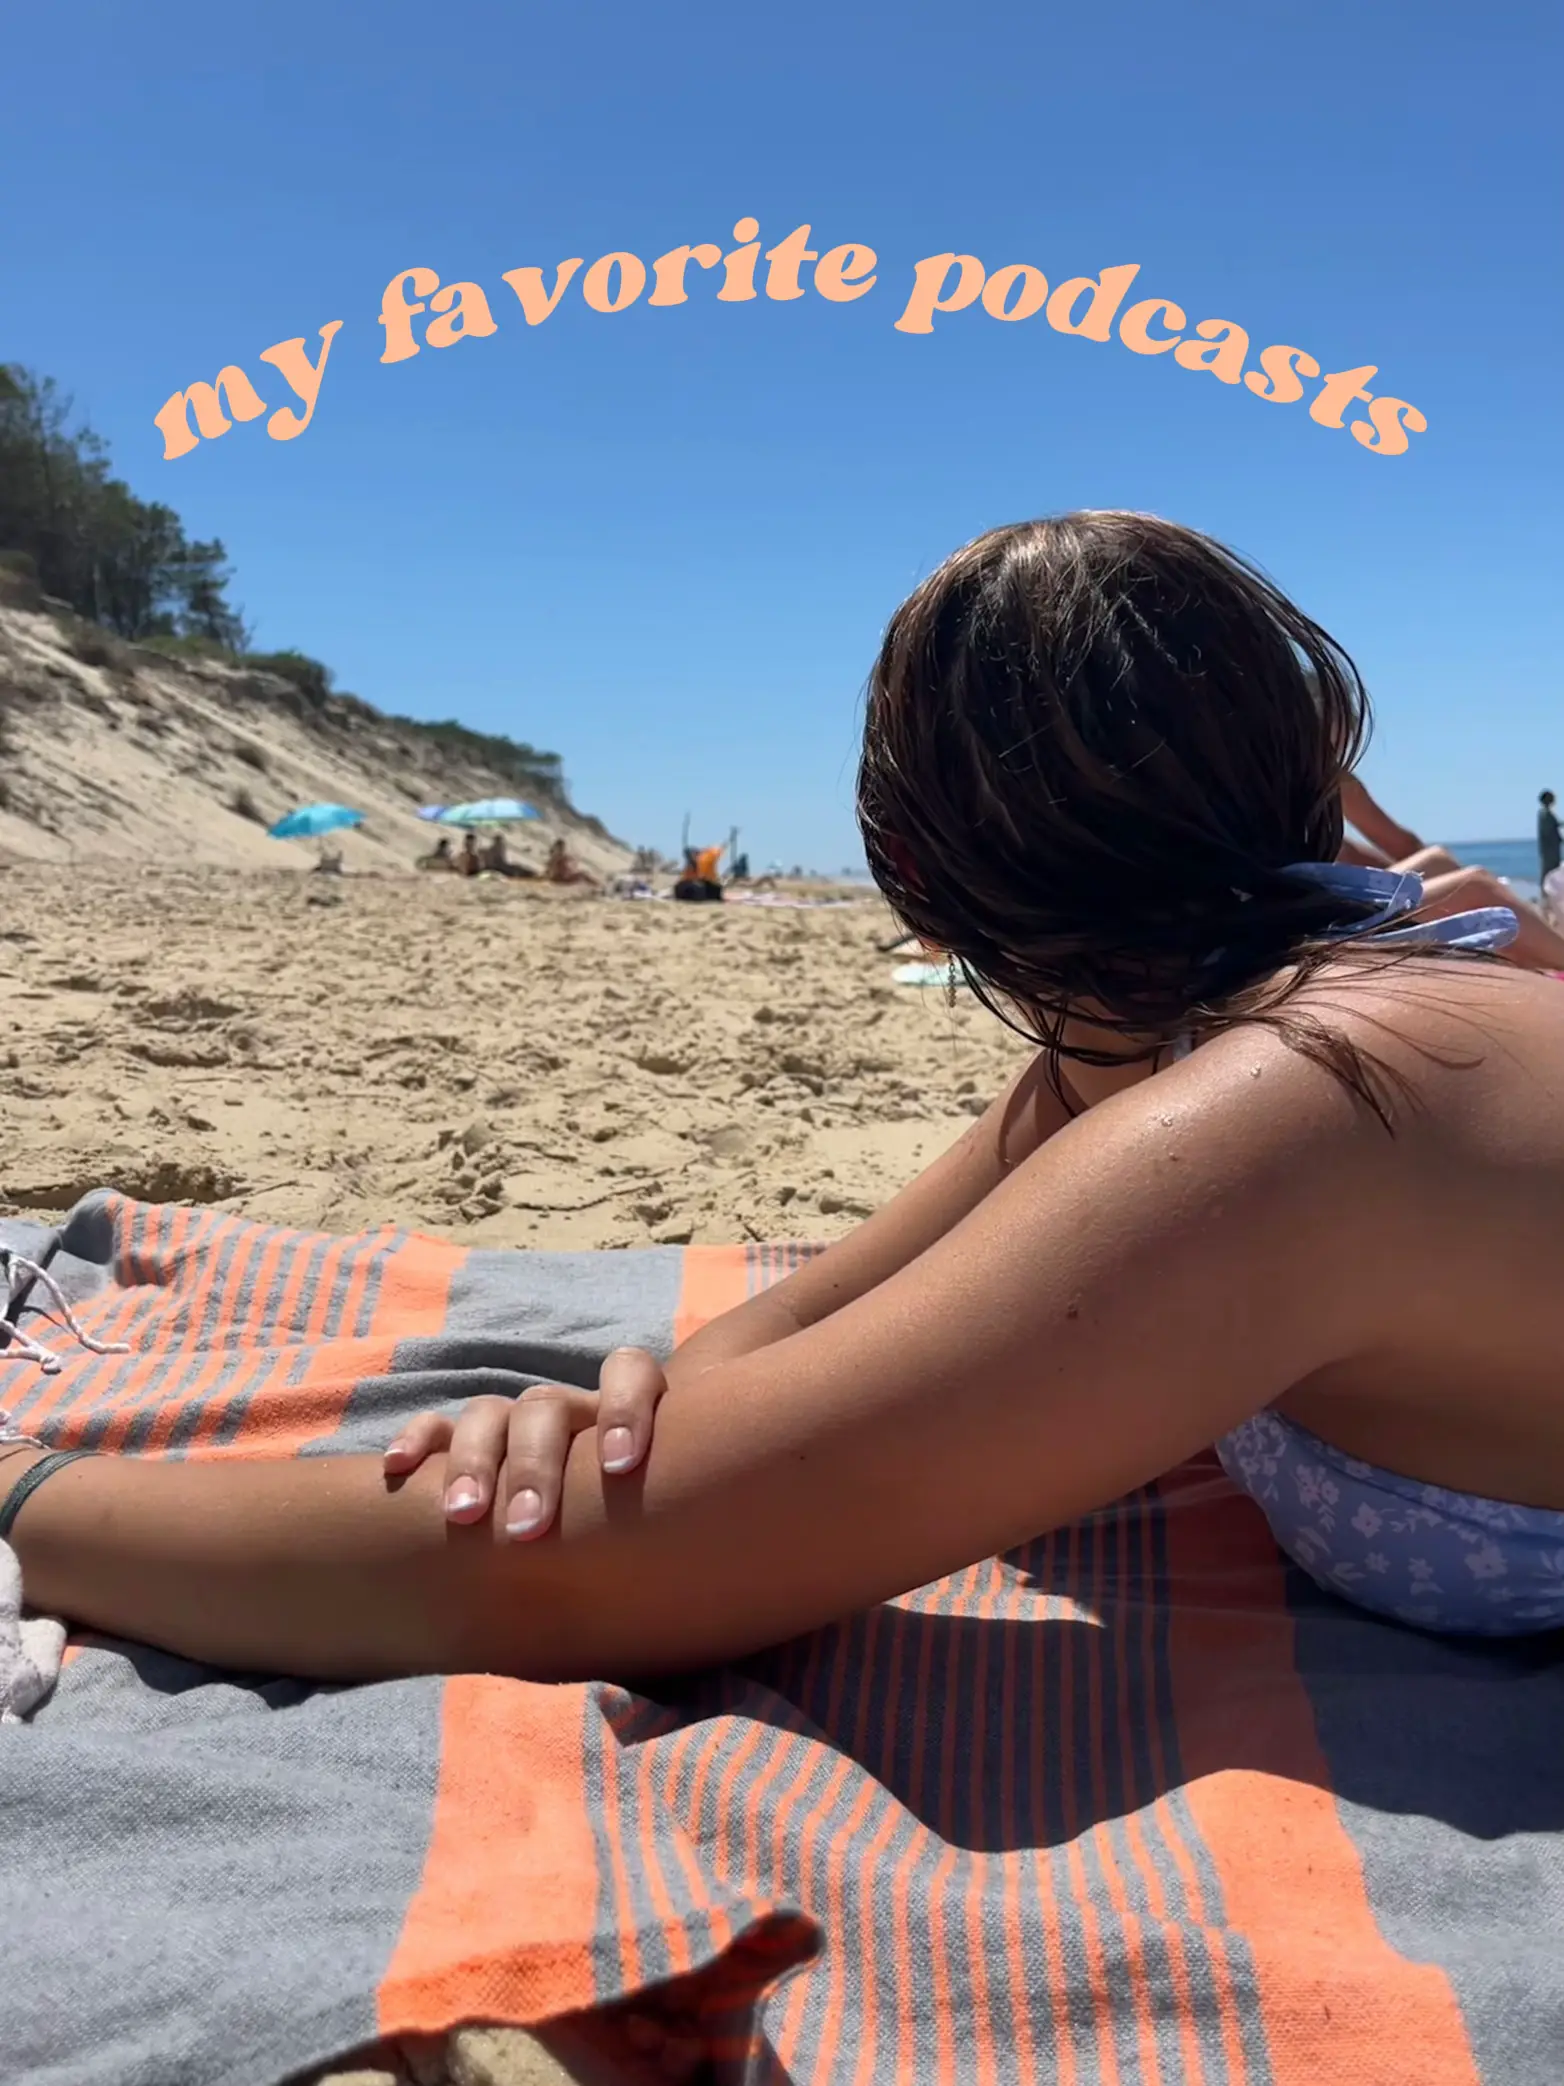  A woman is laying on a towel on the beach, listening to her favorite podcasts.